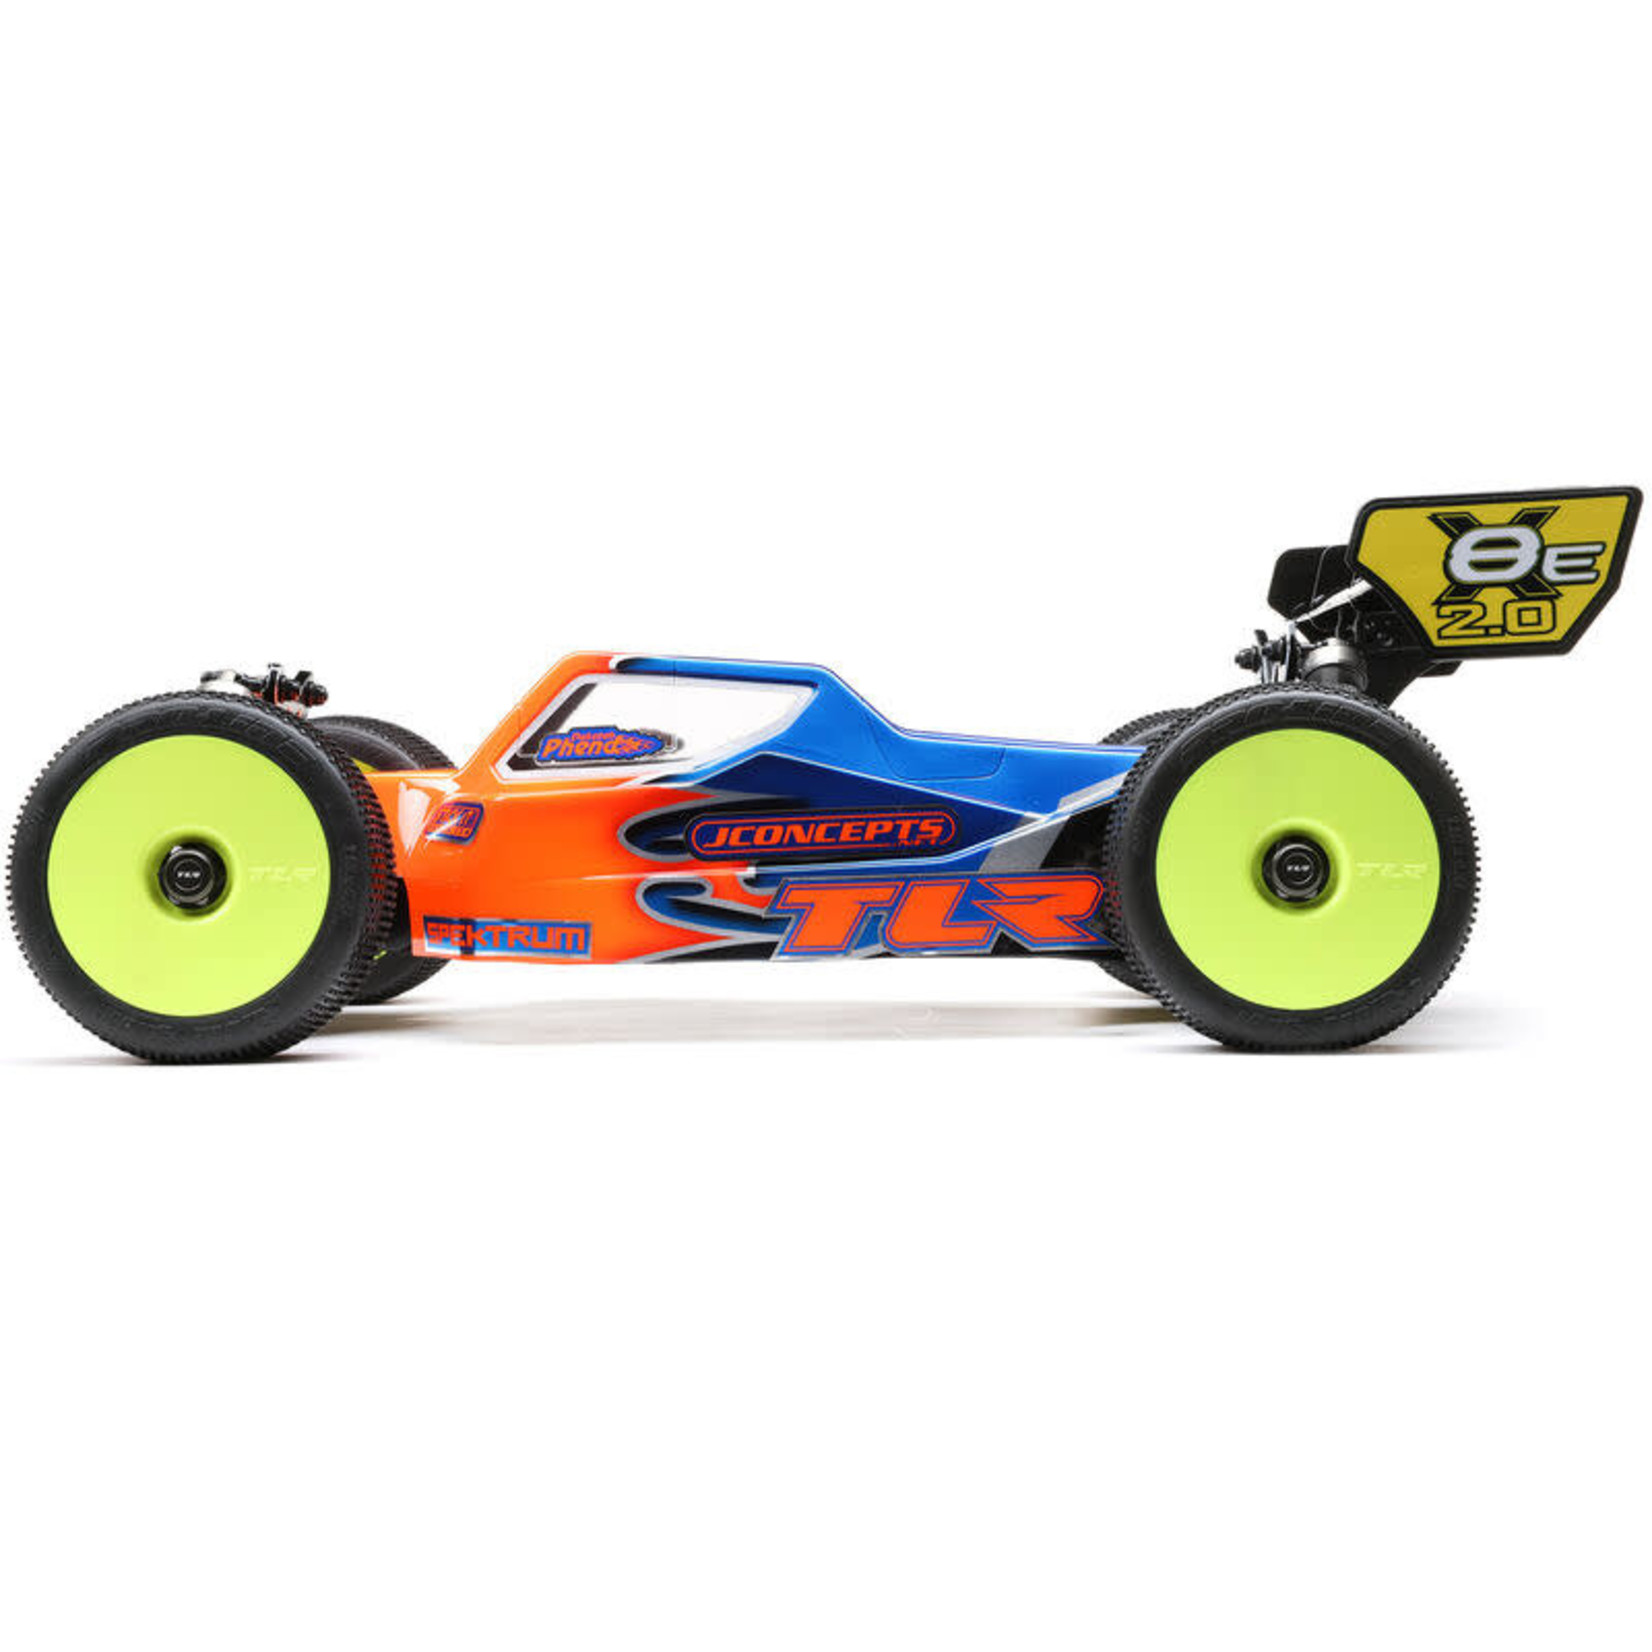 TLR 1/8 8IGHT-X/E 2.0 Combo 4WD Nitro/Electric Race Buggy Kit